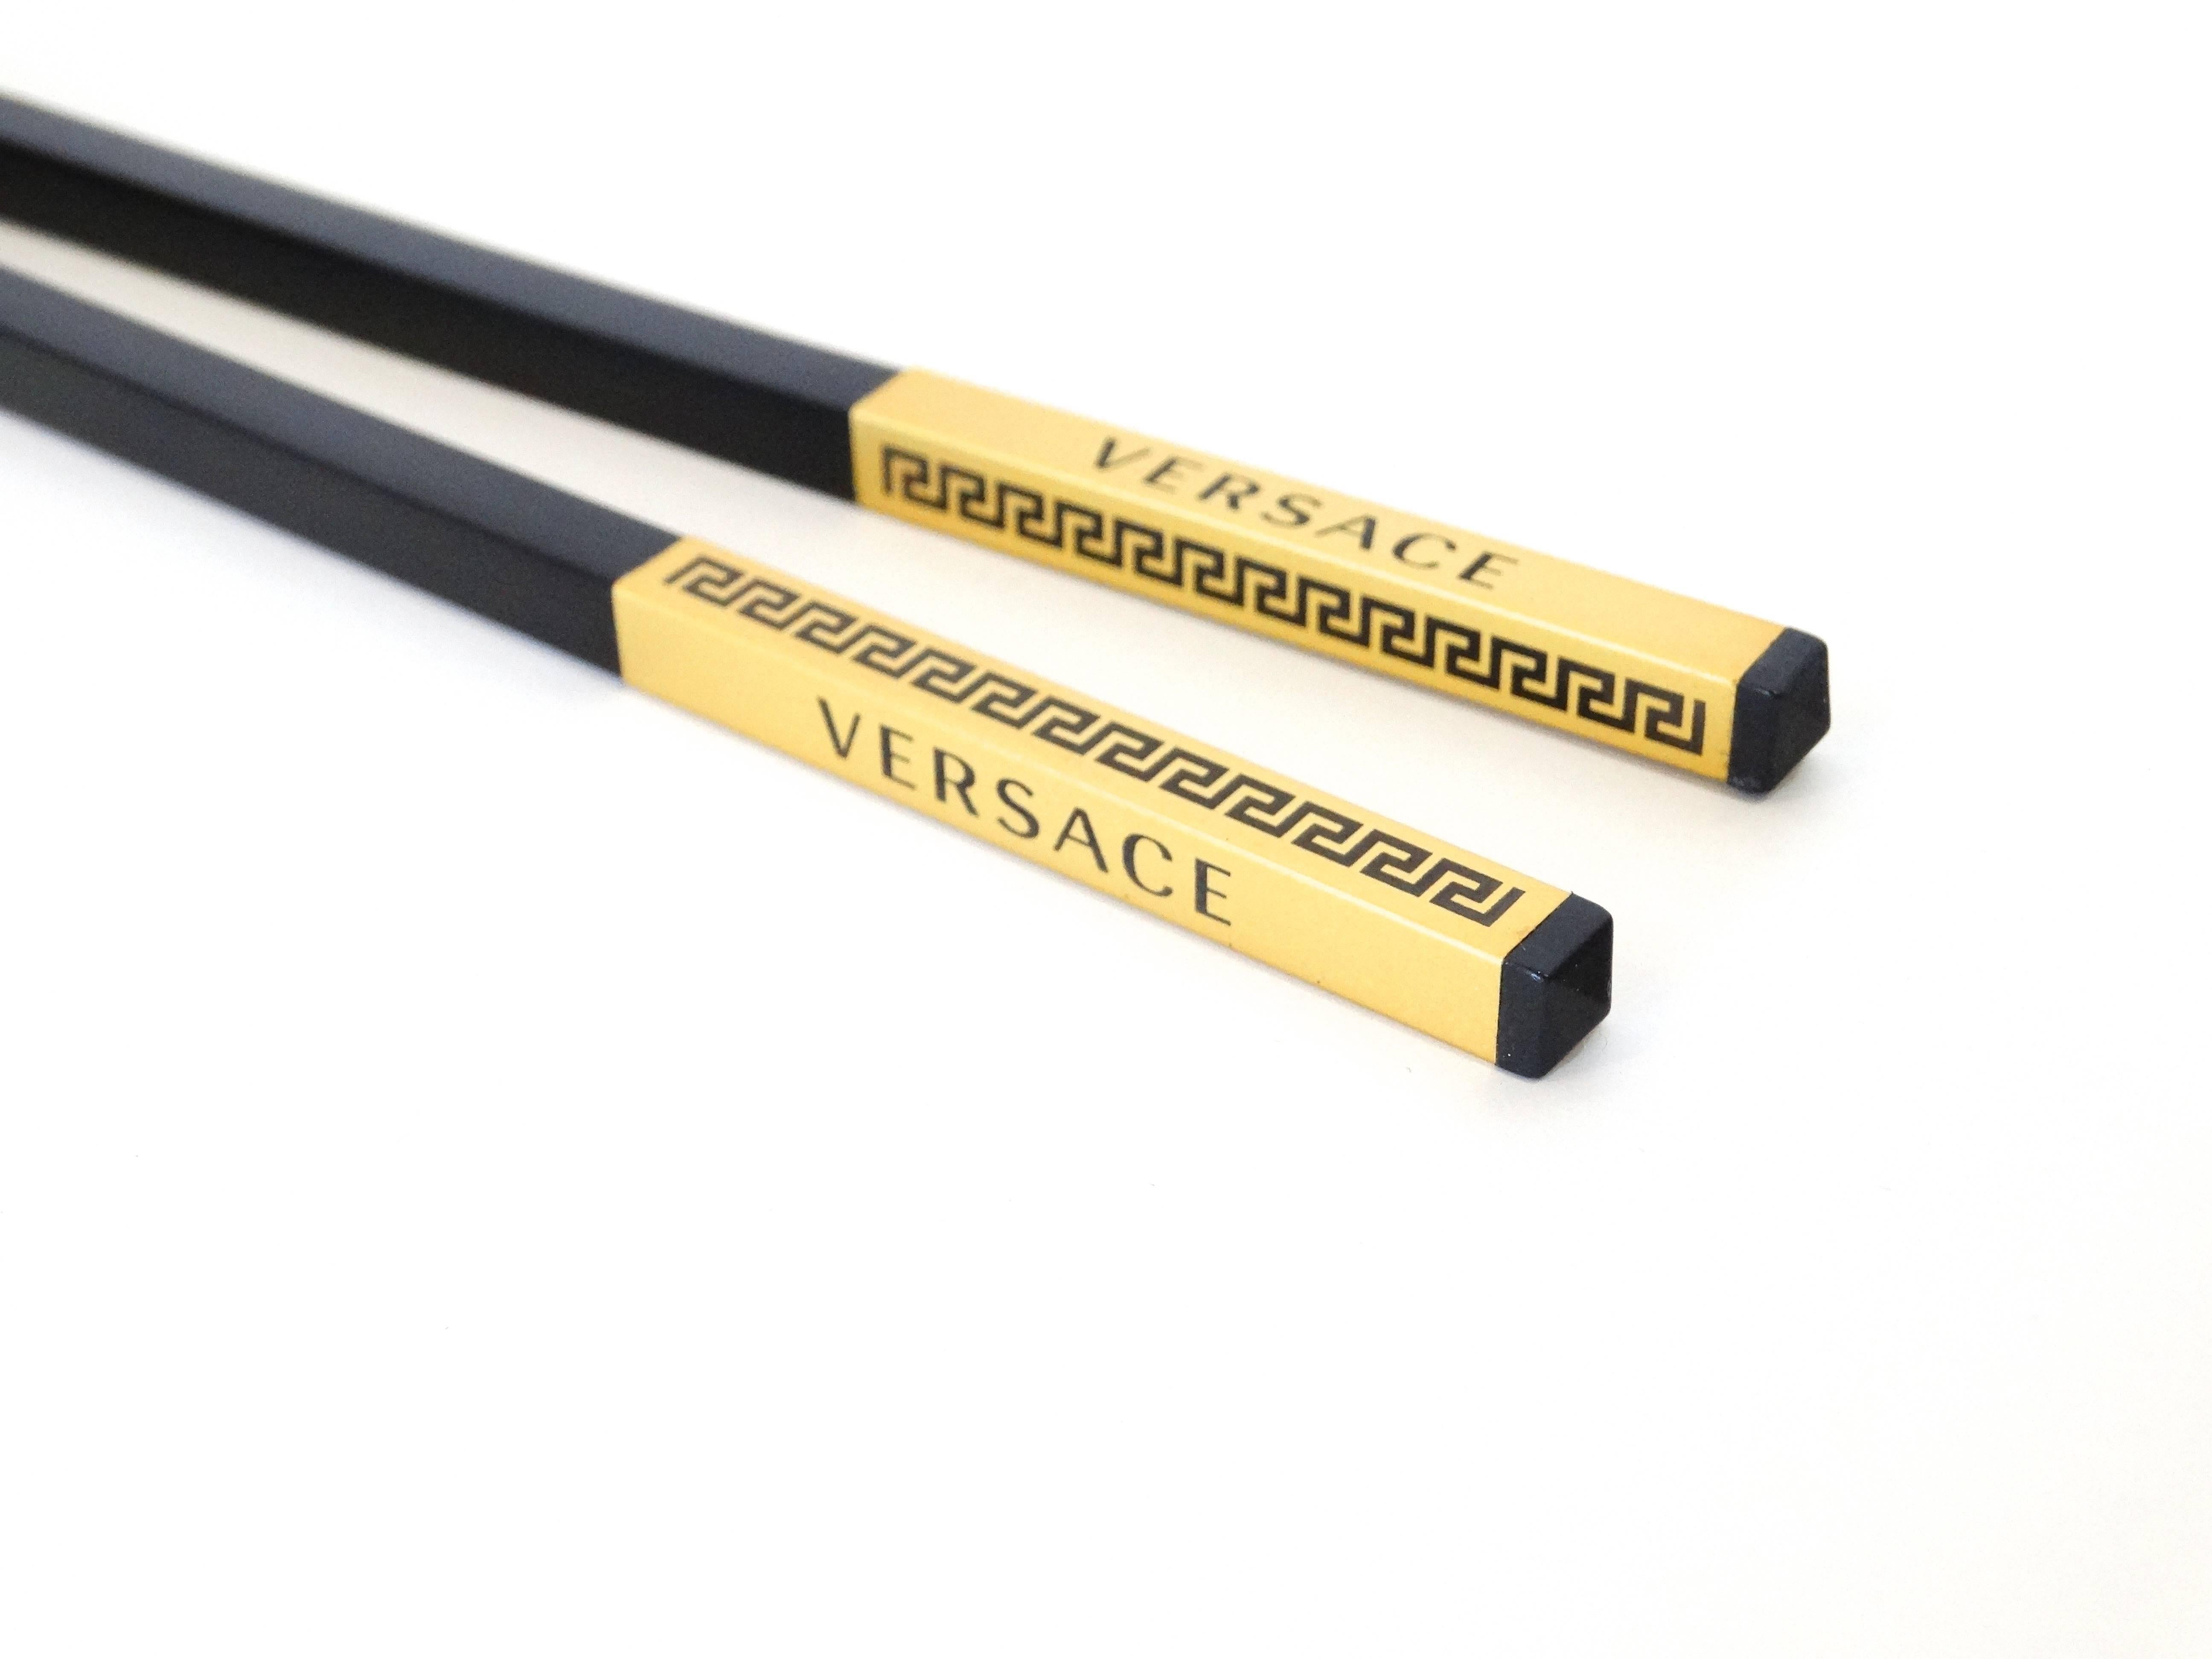 A fabulous set of Versace hair sticks (also called chopsticks) a beautiful matte black color with the signature Greek key design in 24kt gold paint Versace logo, these sticks are straight with a slight pointed end. Nine inches in length, use to hold